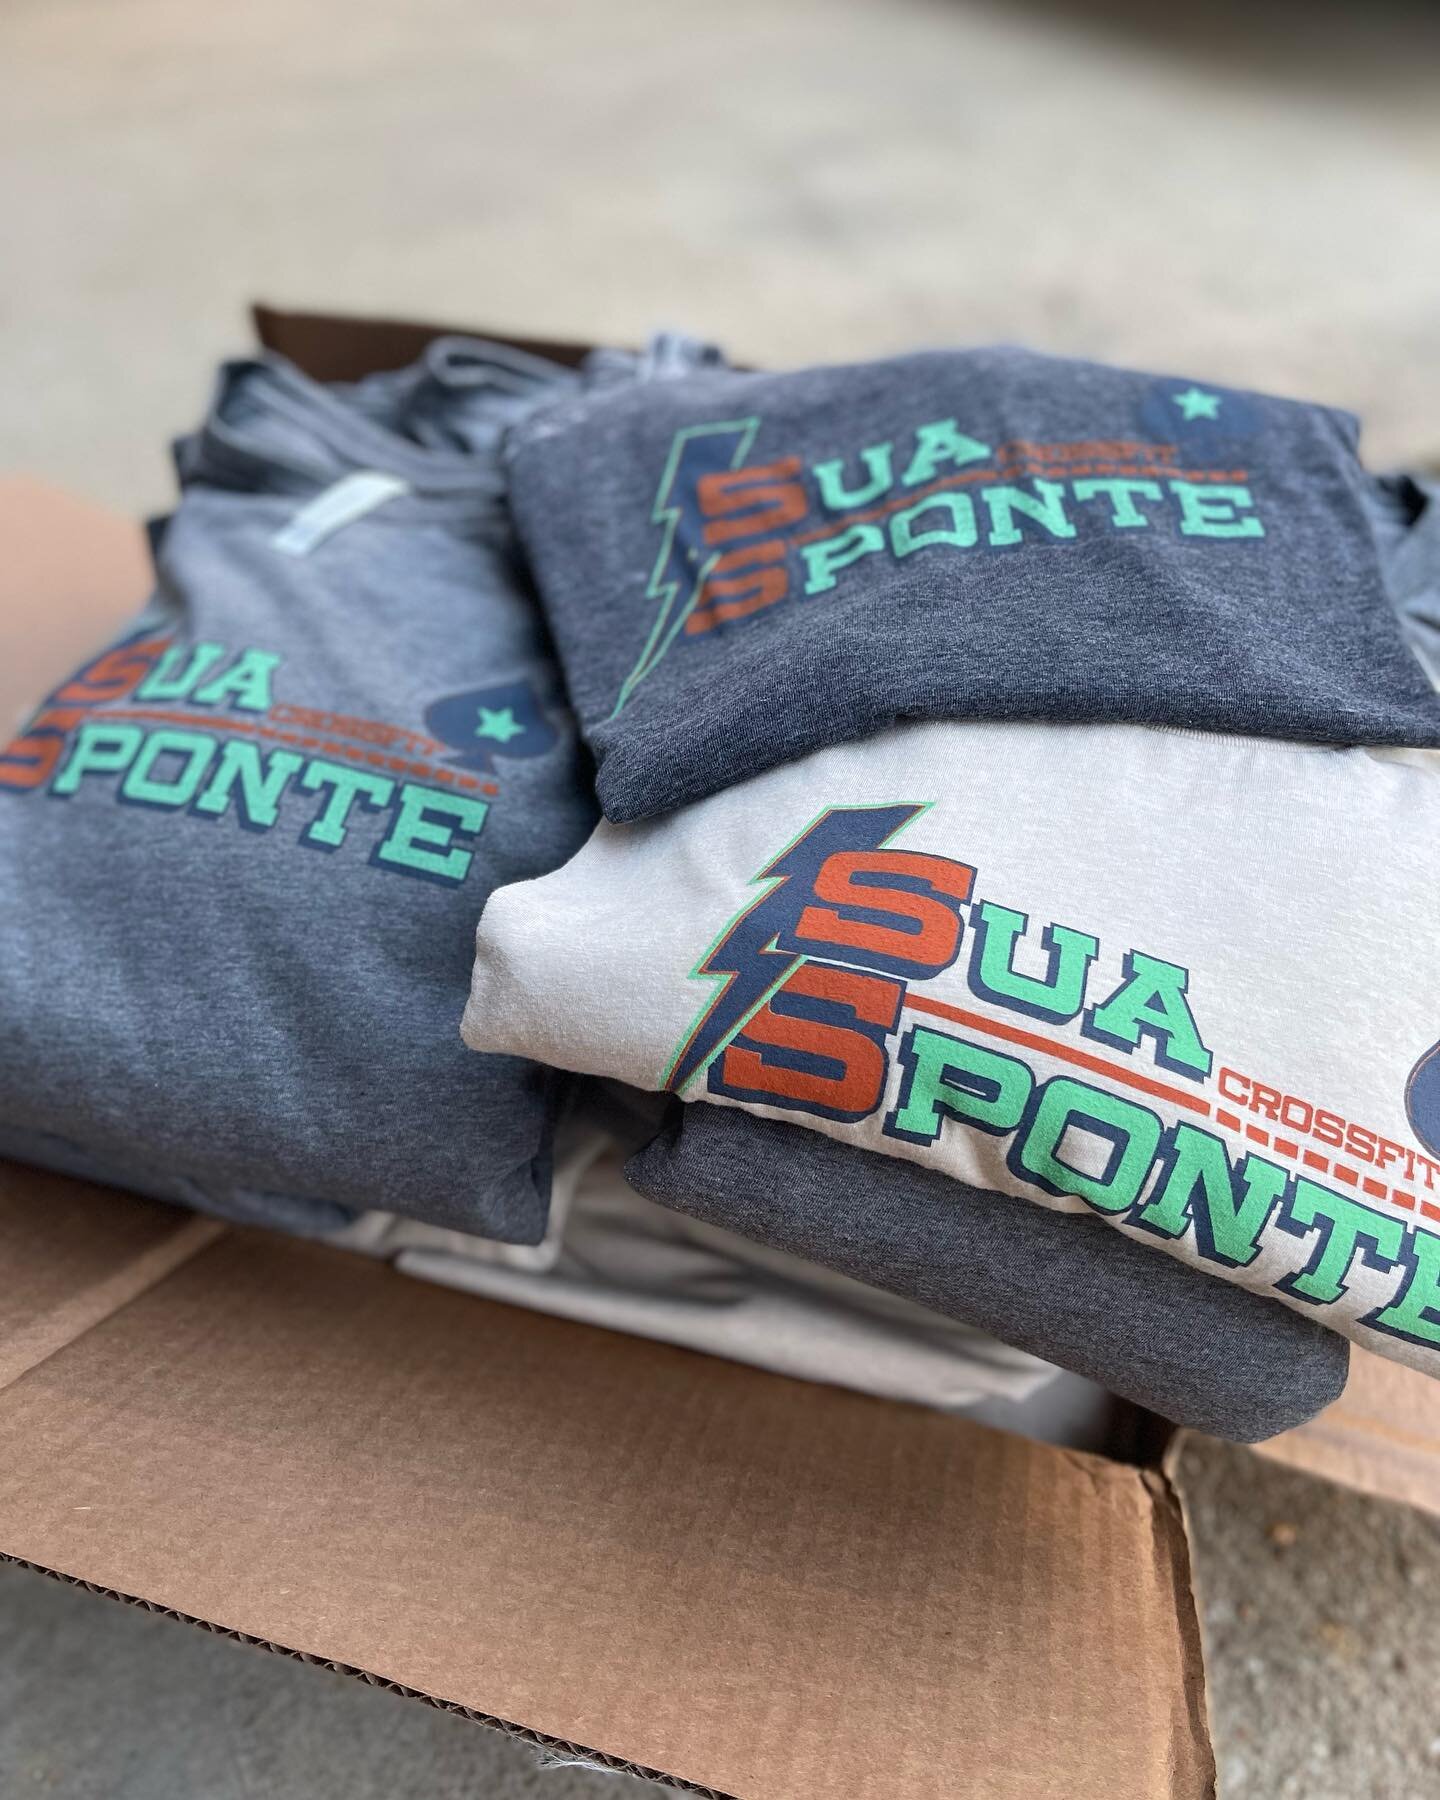 New merch hot off the press 👌

Just wrapped up printing these absolute 🔥 shirts for @crossfitsuasponte &hellip; Thank you for the support!

Looking to sweat with an awesome community of athletes in either Raleigh or Durham? Hit &lsquo;em up 🏋️&zwj